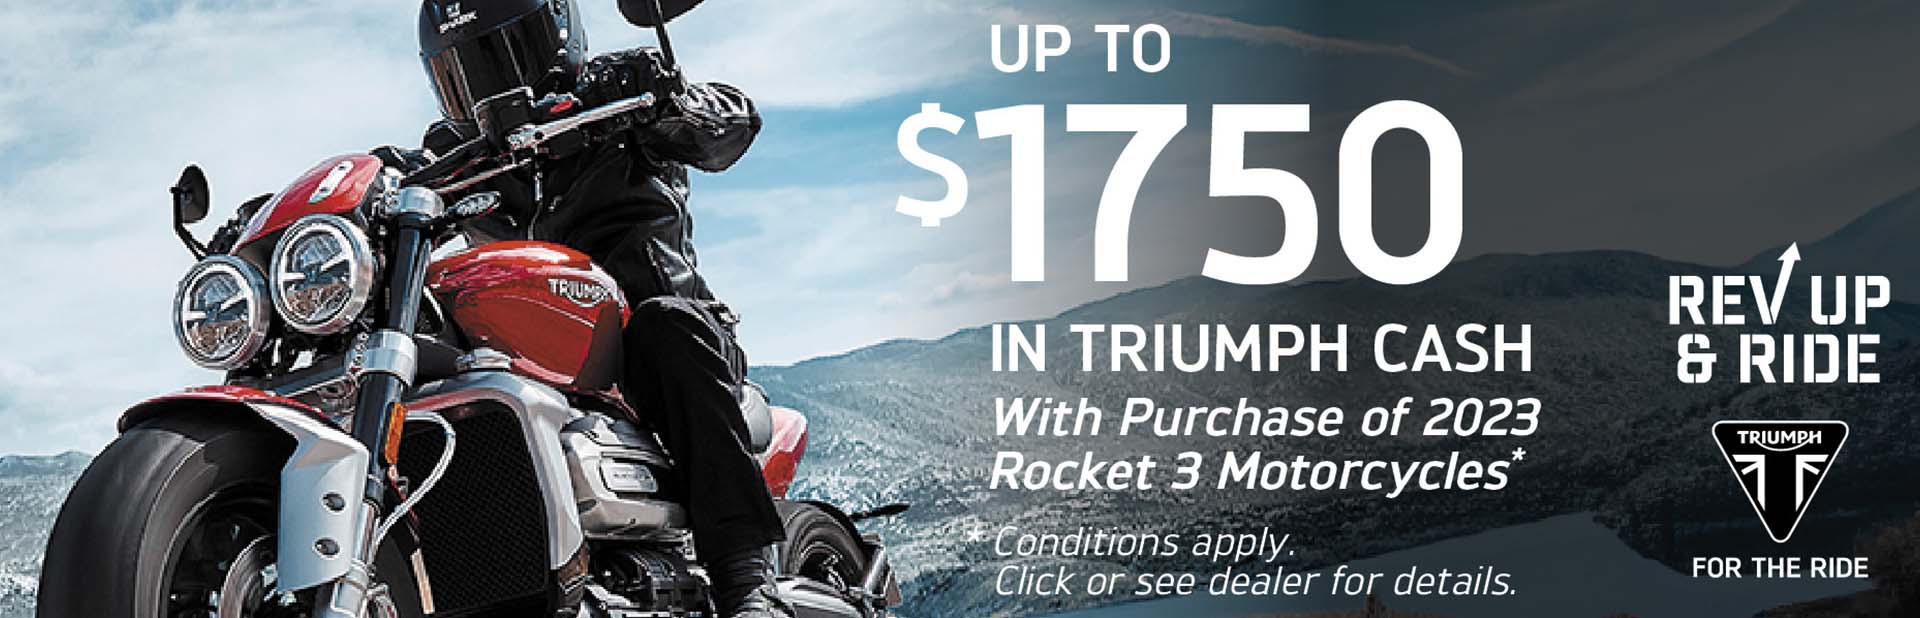 Up To $1750 In Triumph Cash